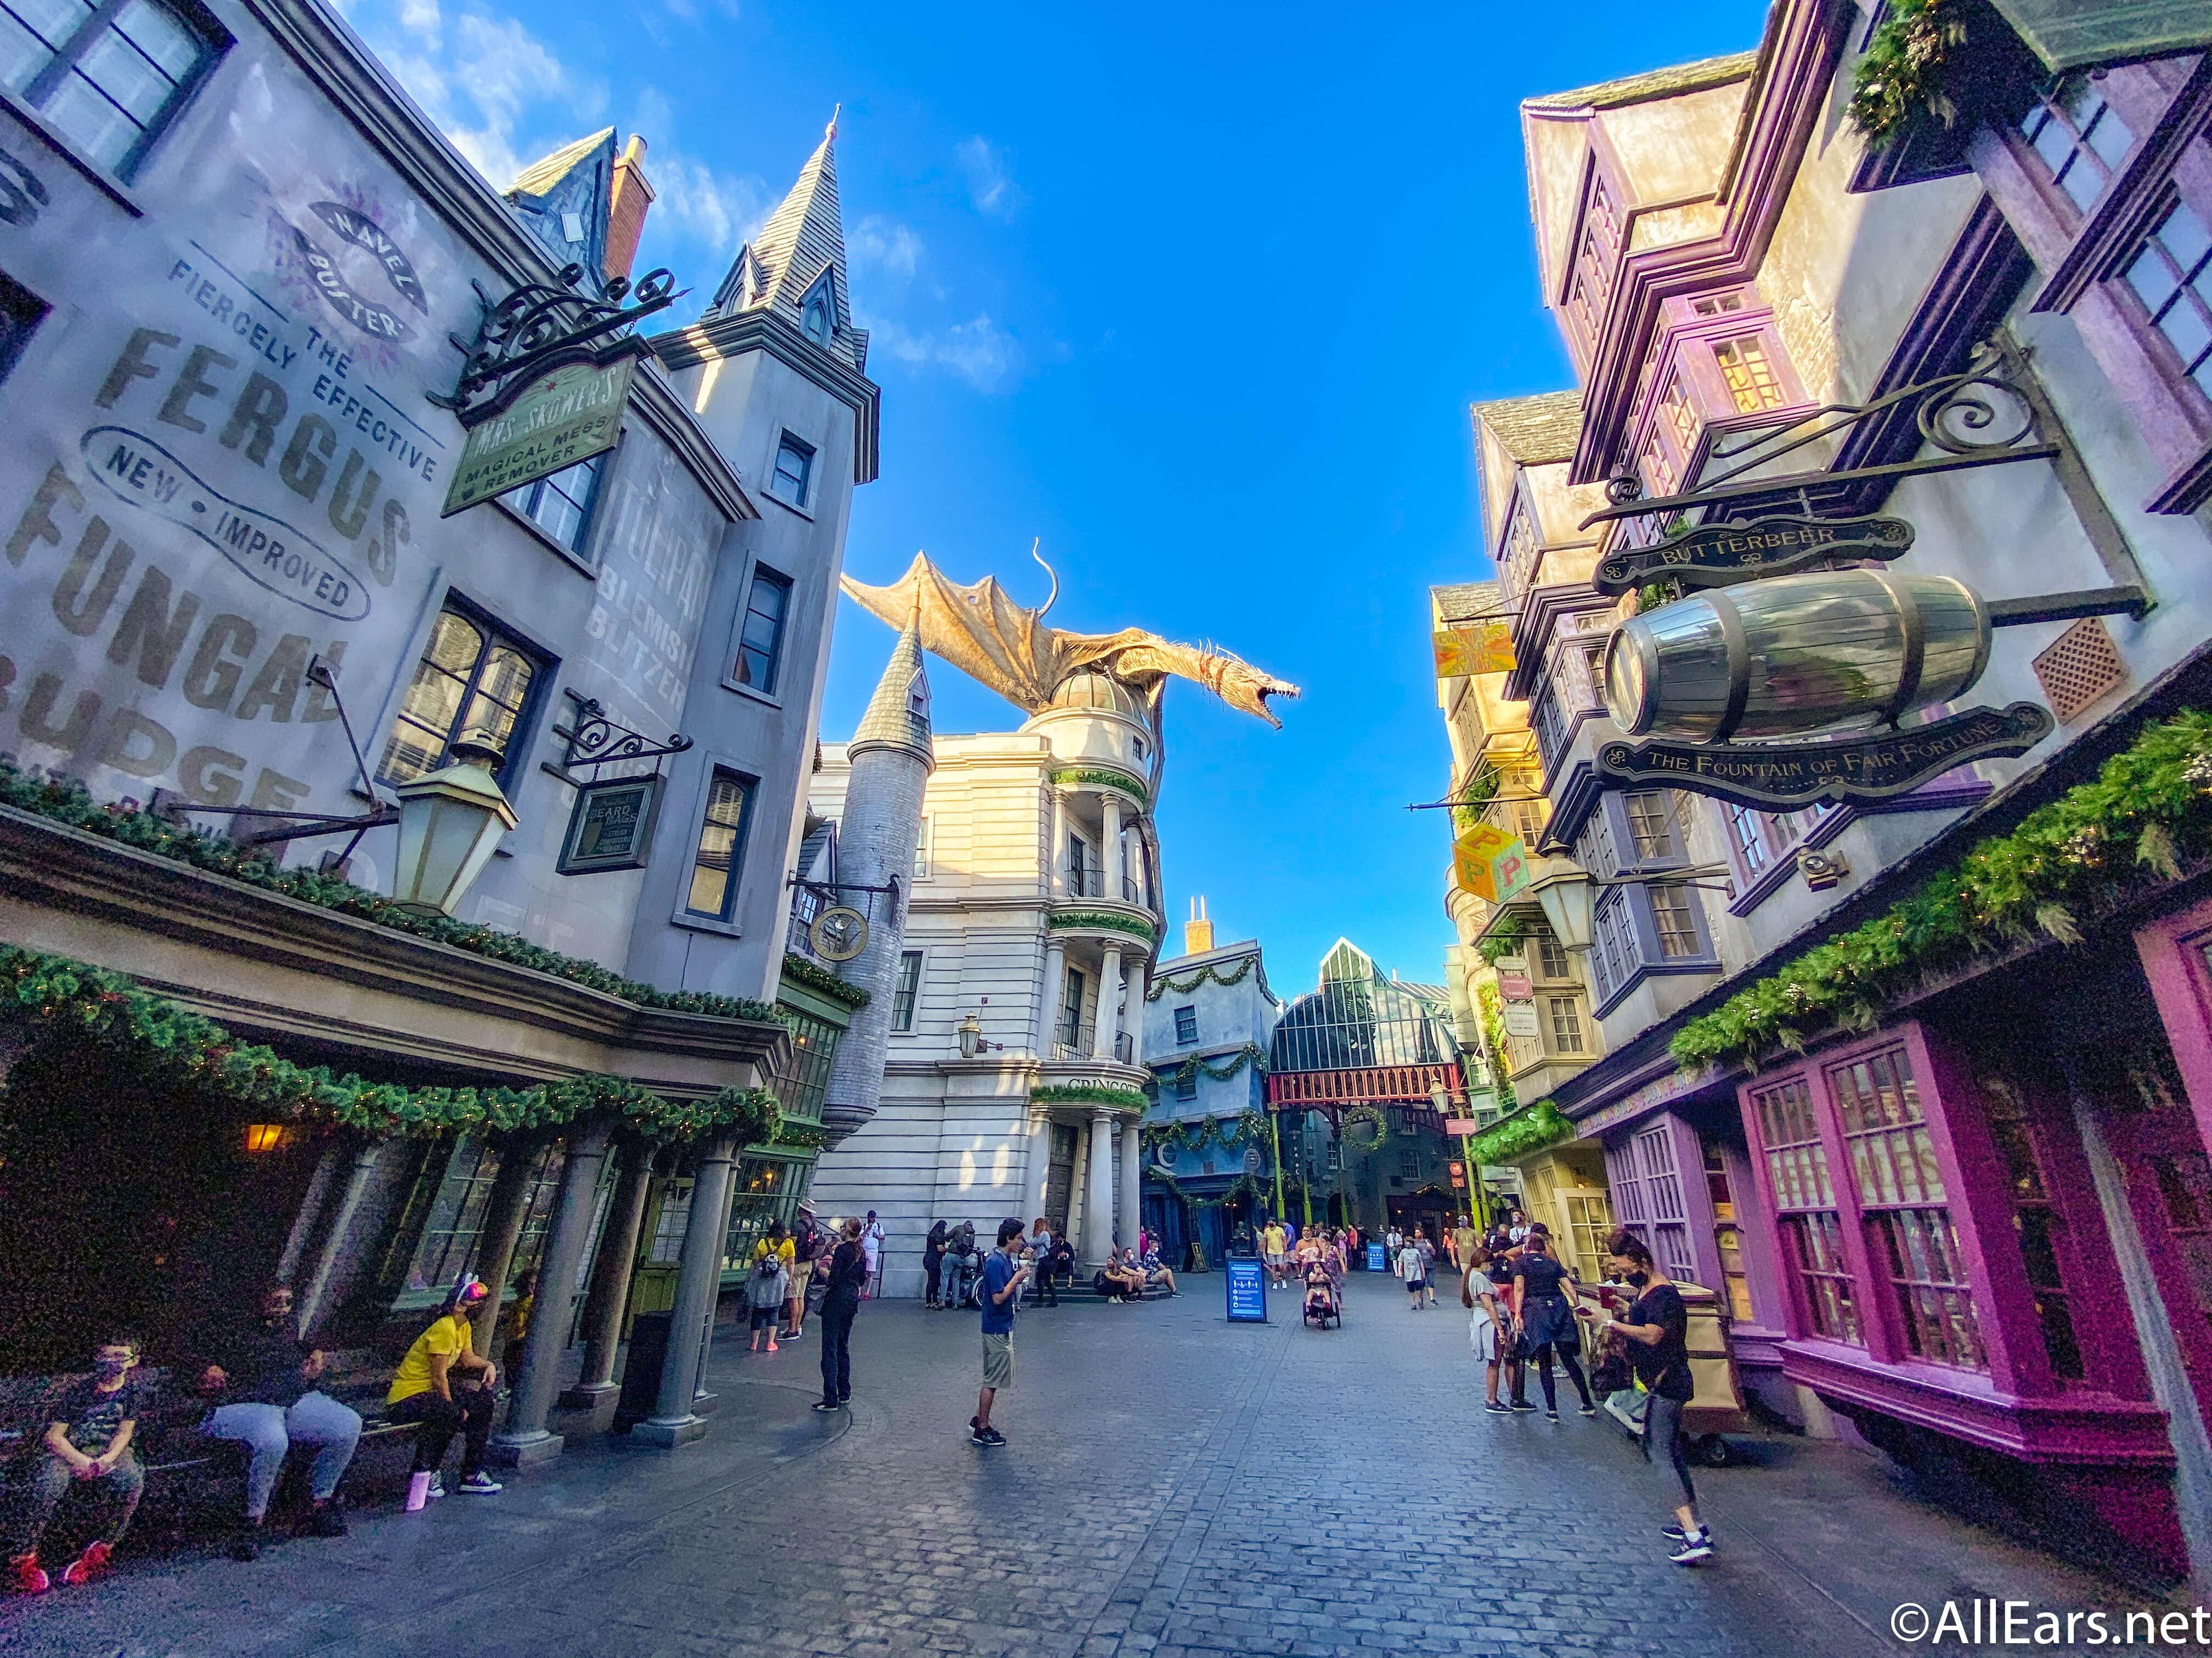 Diagon Alley Holiday Landscape Wallpaper Allears